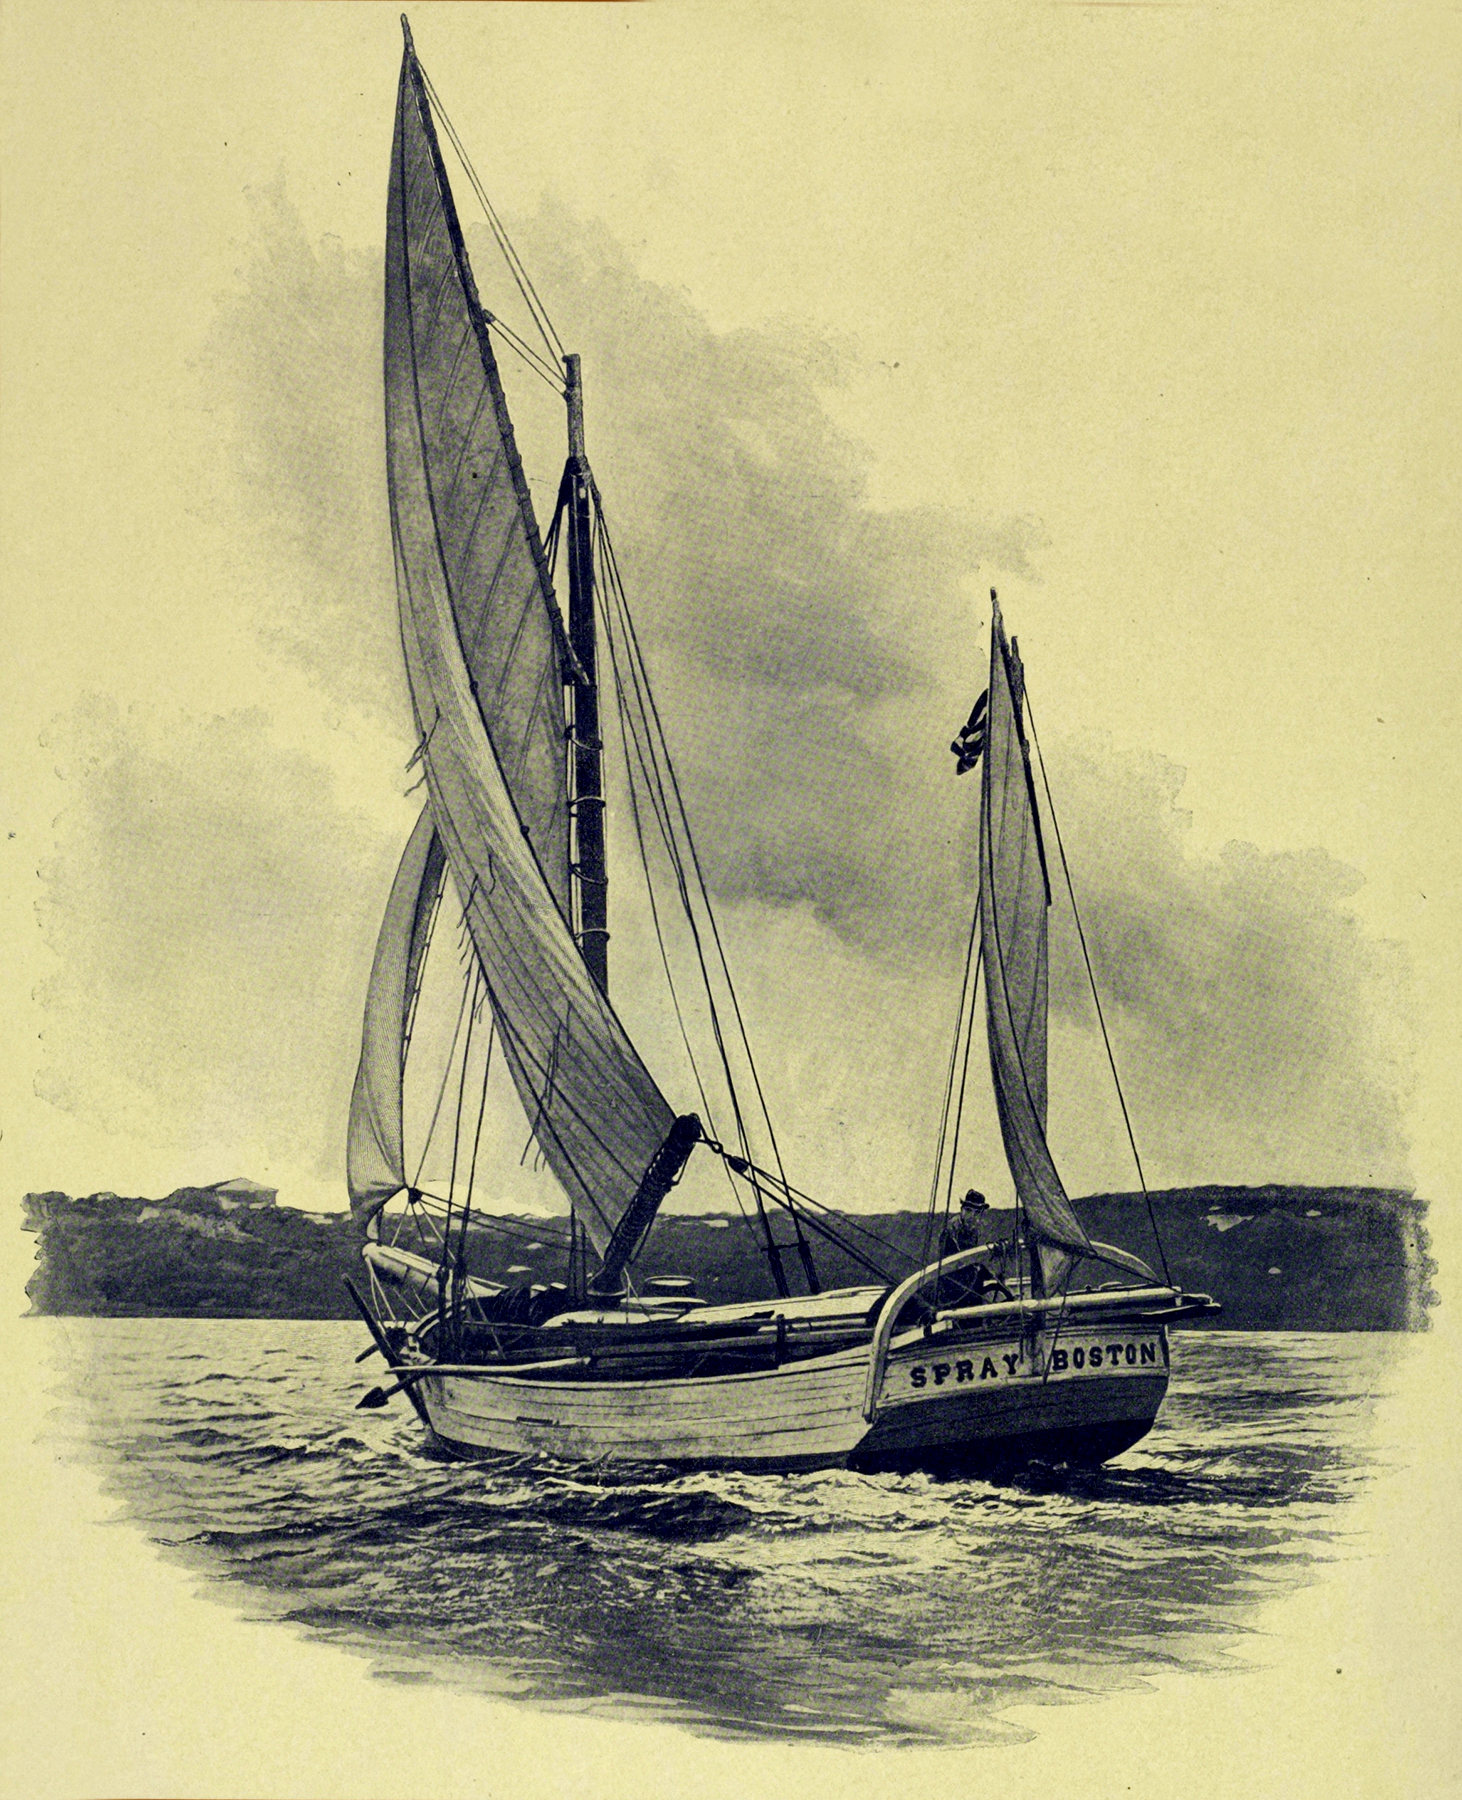 Vintage Sailboat And Man Image! - The Graphics Fairy